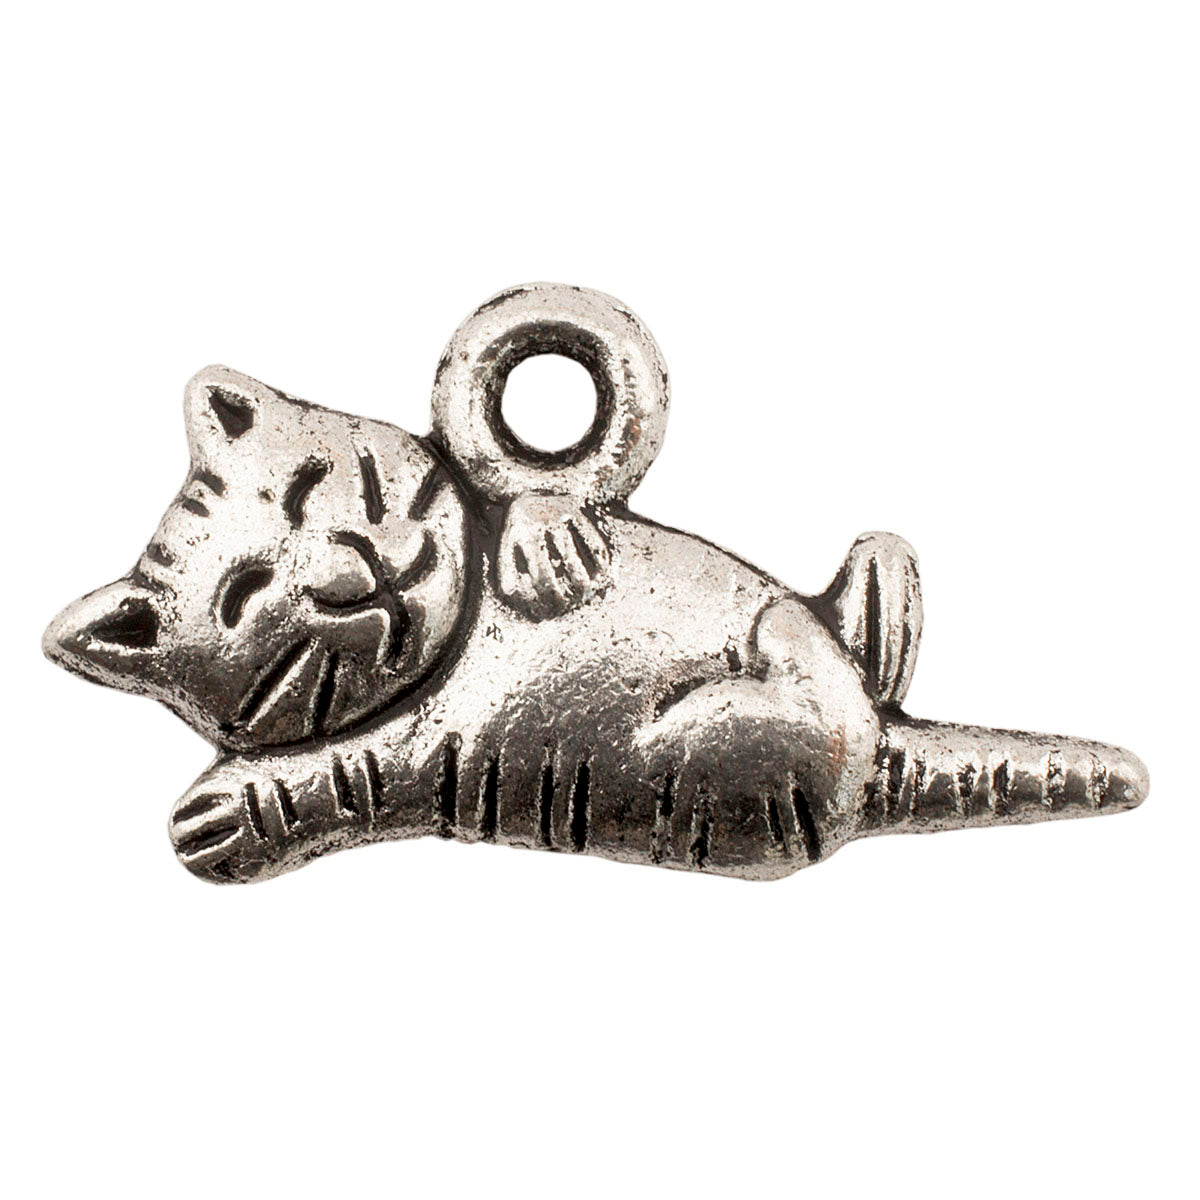 Cat Charm - Choose Your Sterling Silver Cat Charm to Add to Bracelet Space Cat